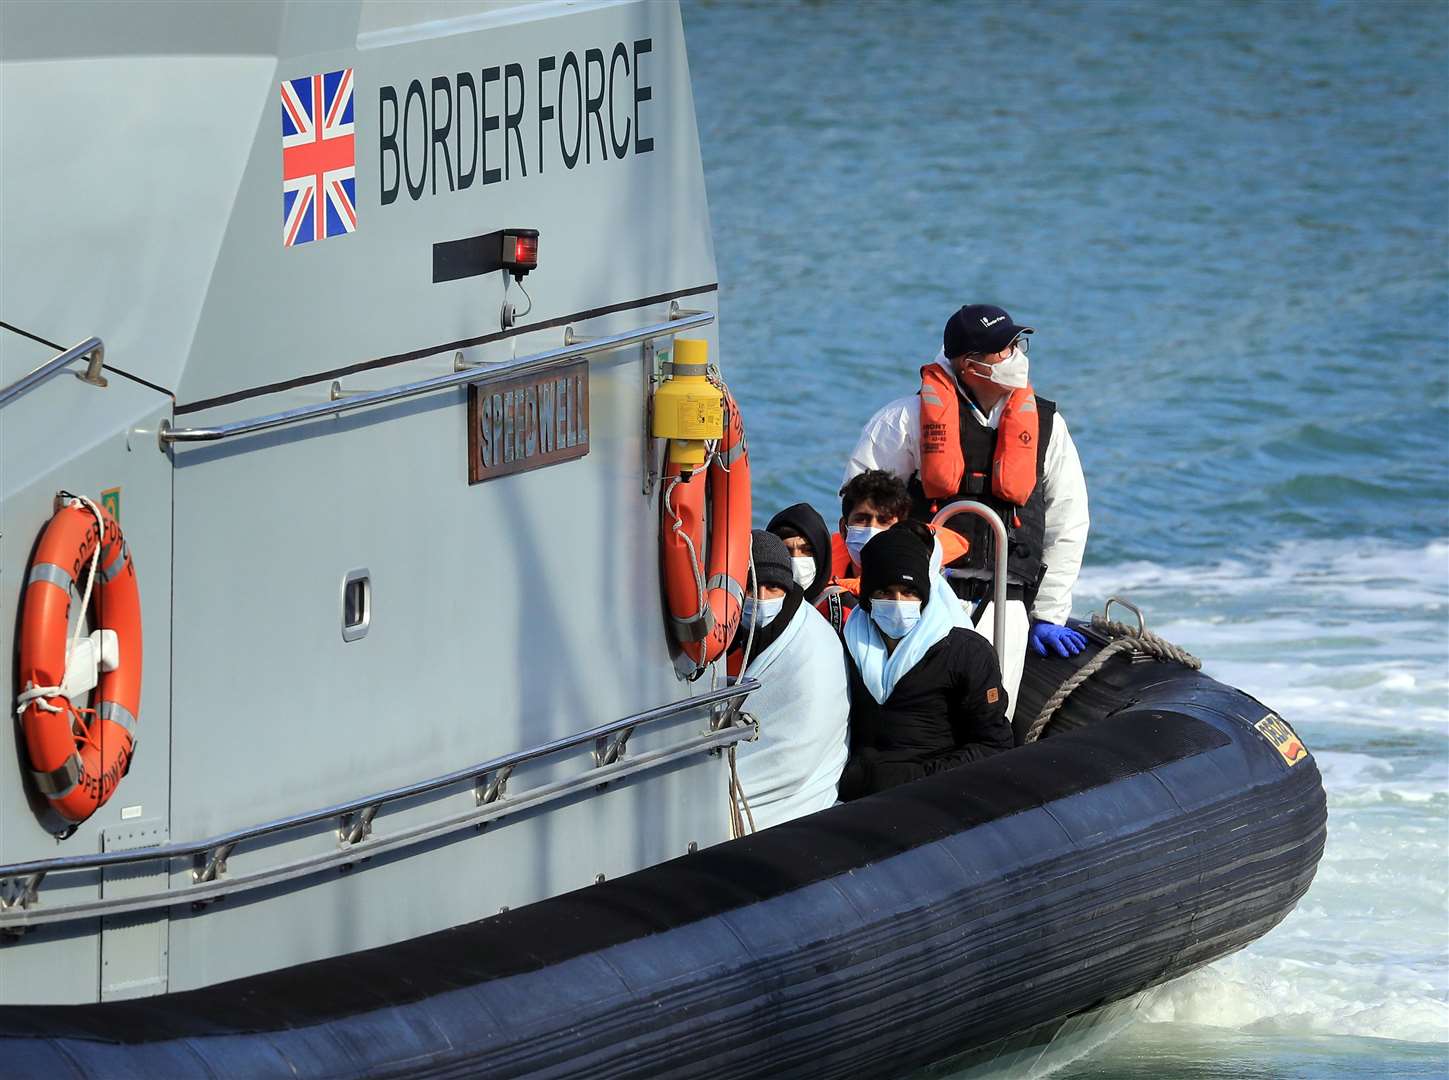 A group of people thought to be migrants are brought into Dover by Border Force (Gareth Fuller/PA)